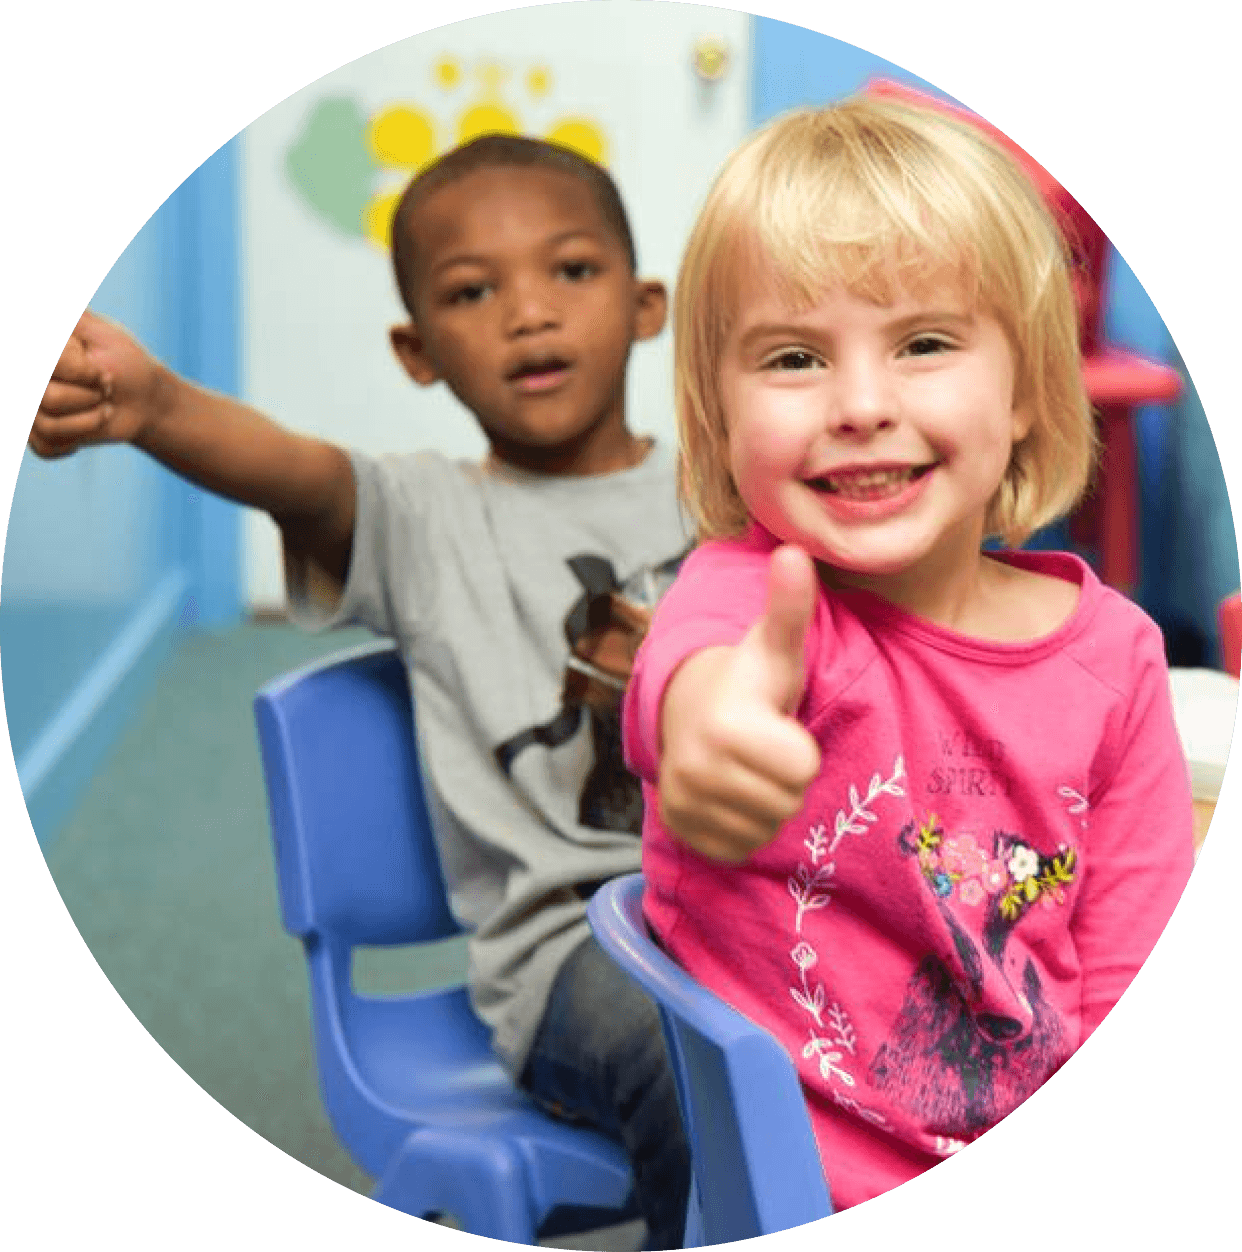 Two smiling children giving a joyful thumbs up